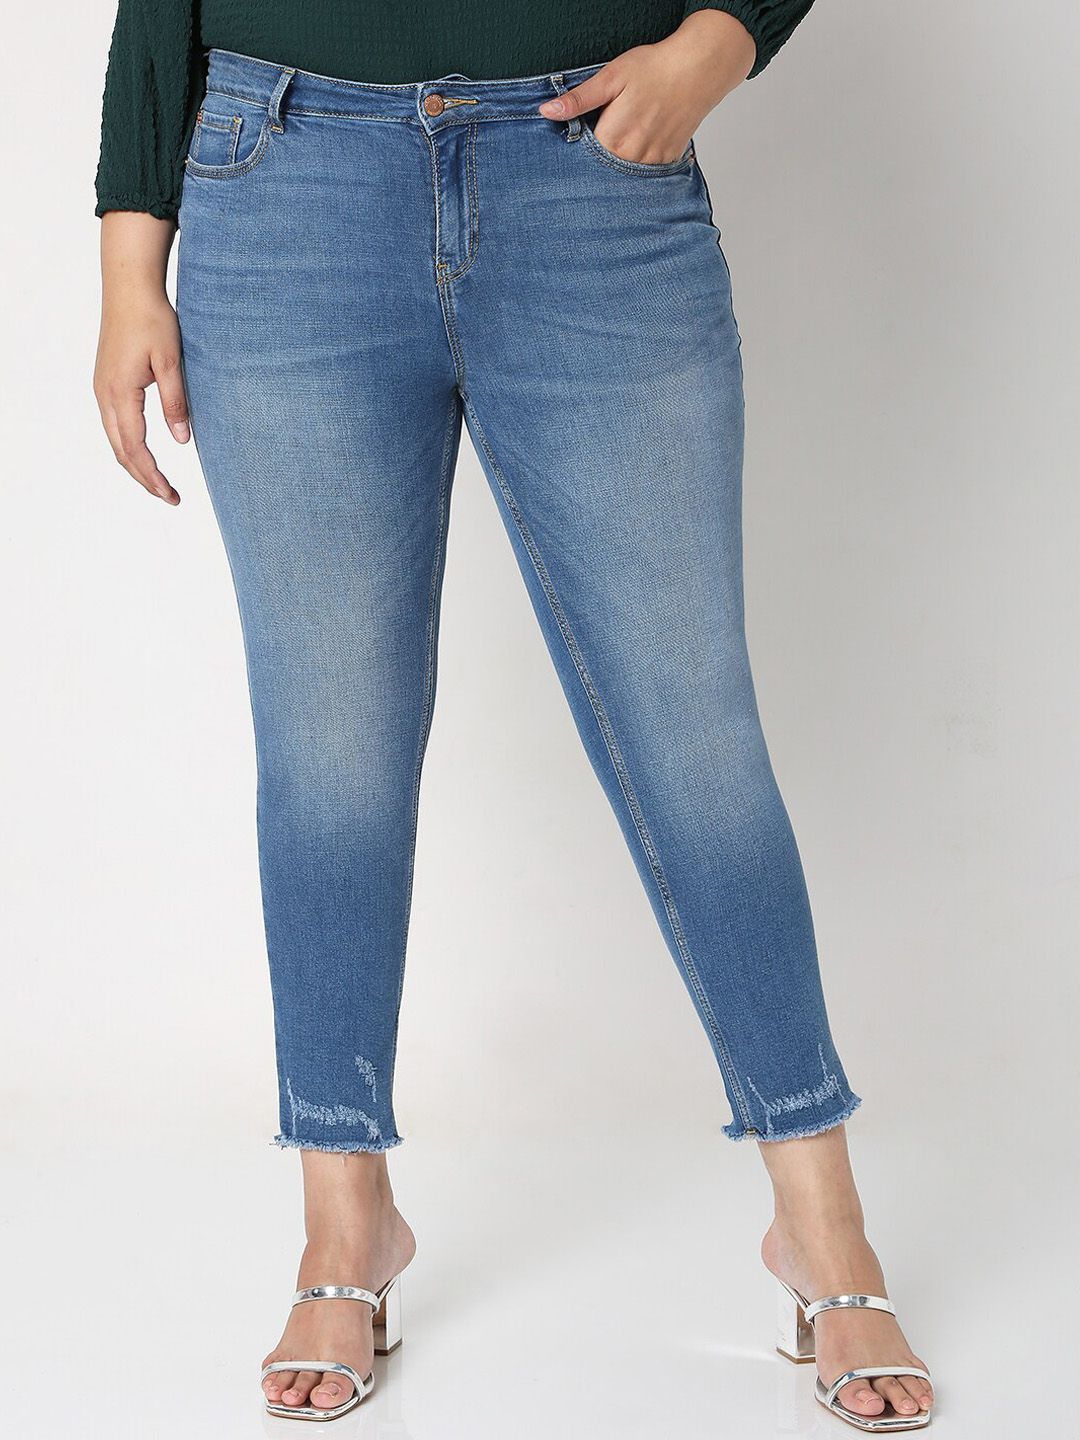 Vero Moda Women Blue High-Rise Mildly Distressed Light Fade Stretchable Jeans Price in India